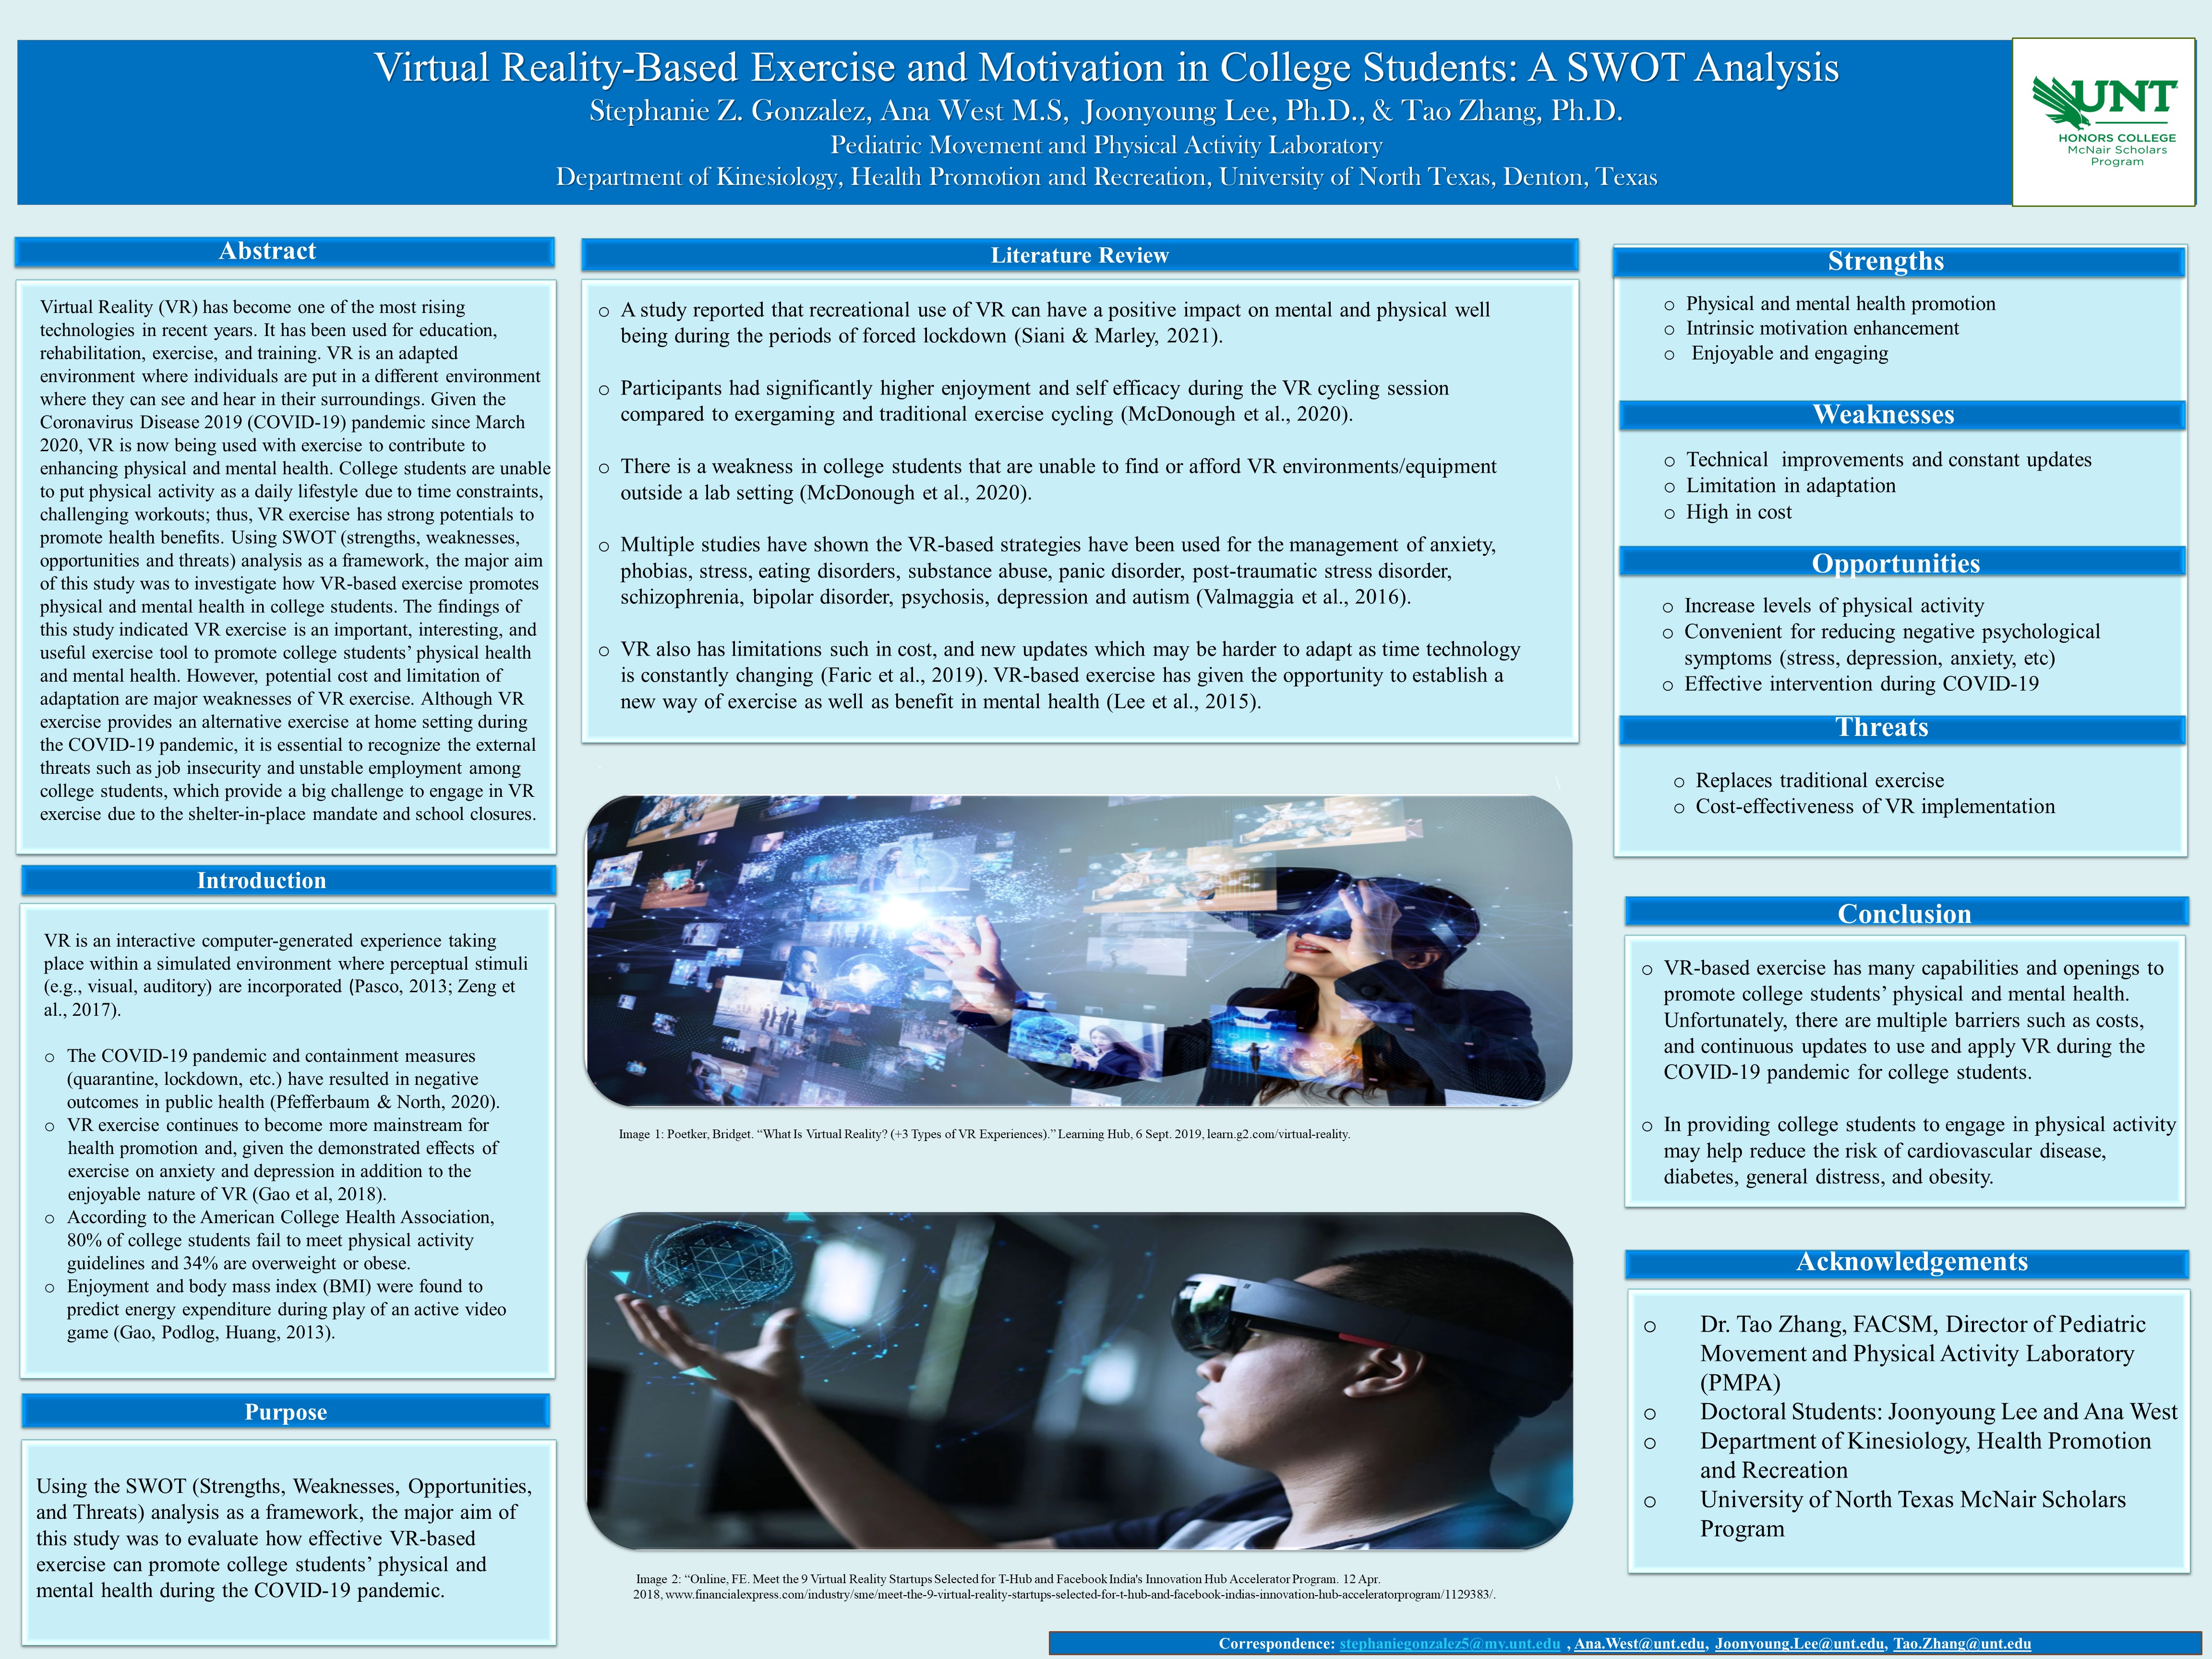 Virtual Reality-Based Exercise and Motivation in College Students – SWOT Analysis